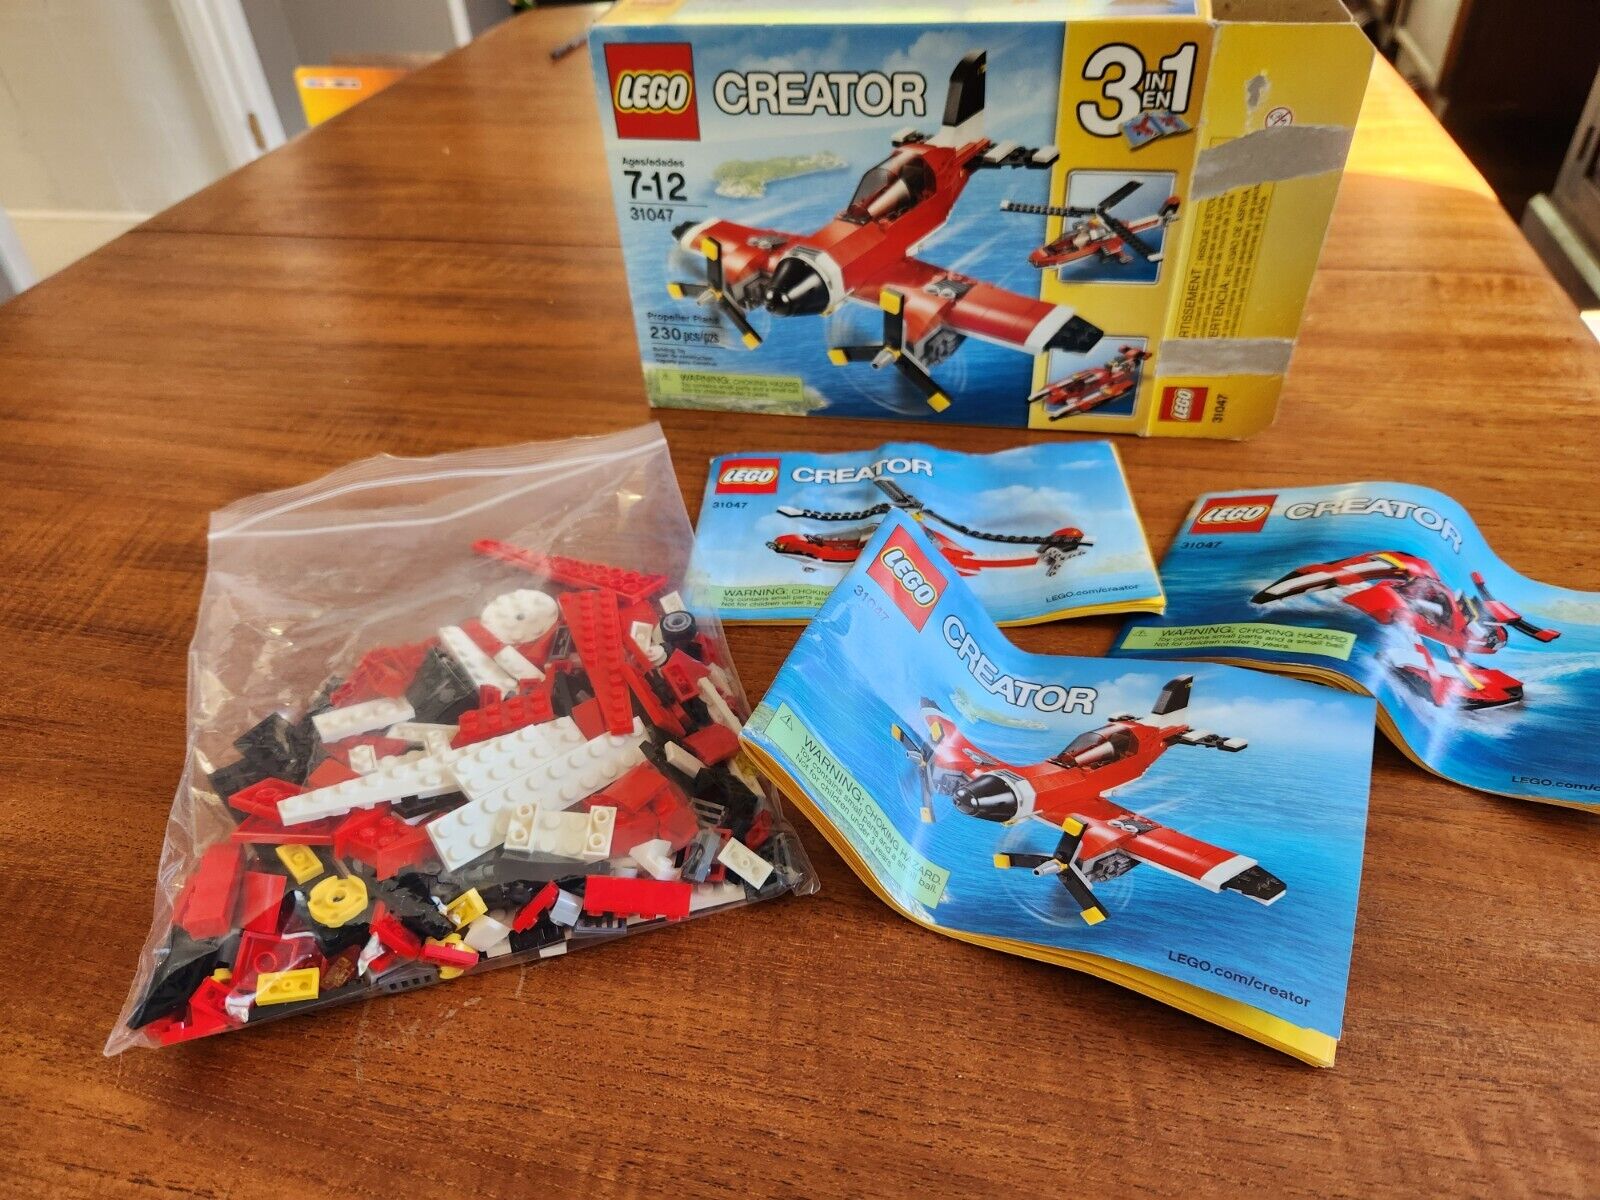 Lego Creator 31047 3-in-1 Propeller Plane.  100% complete with box and manuals